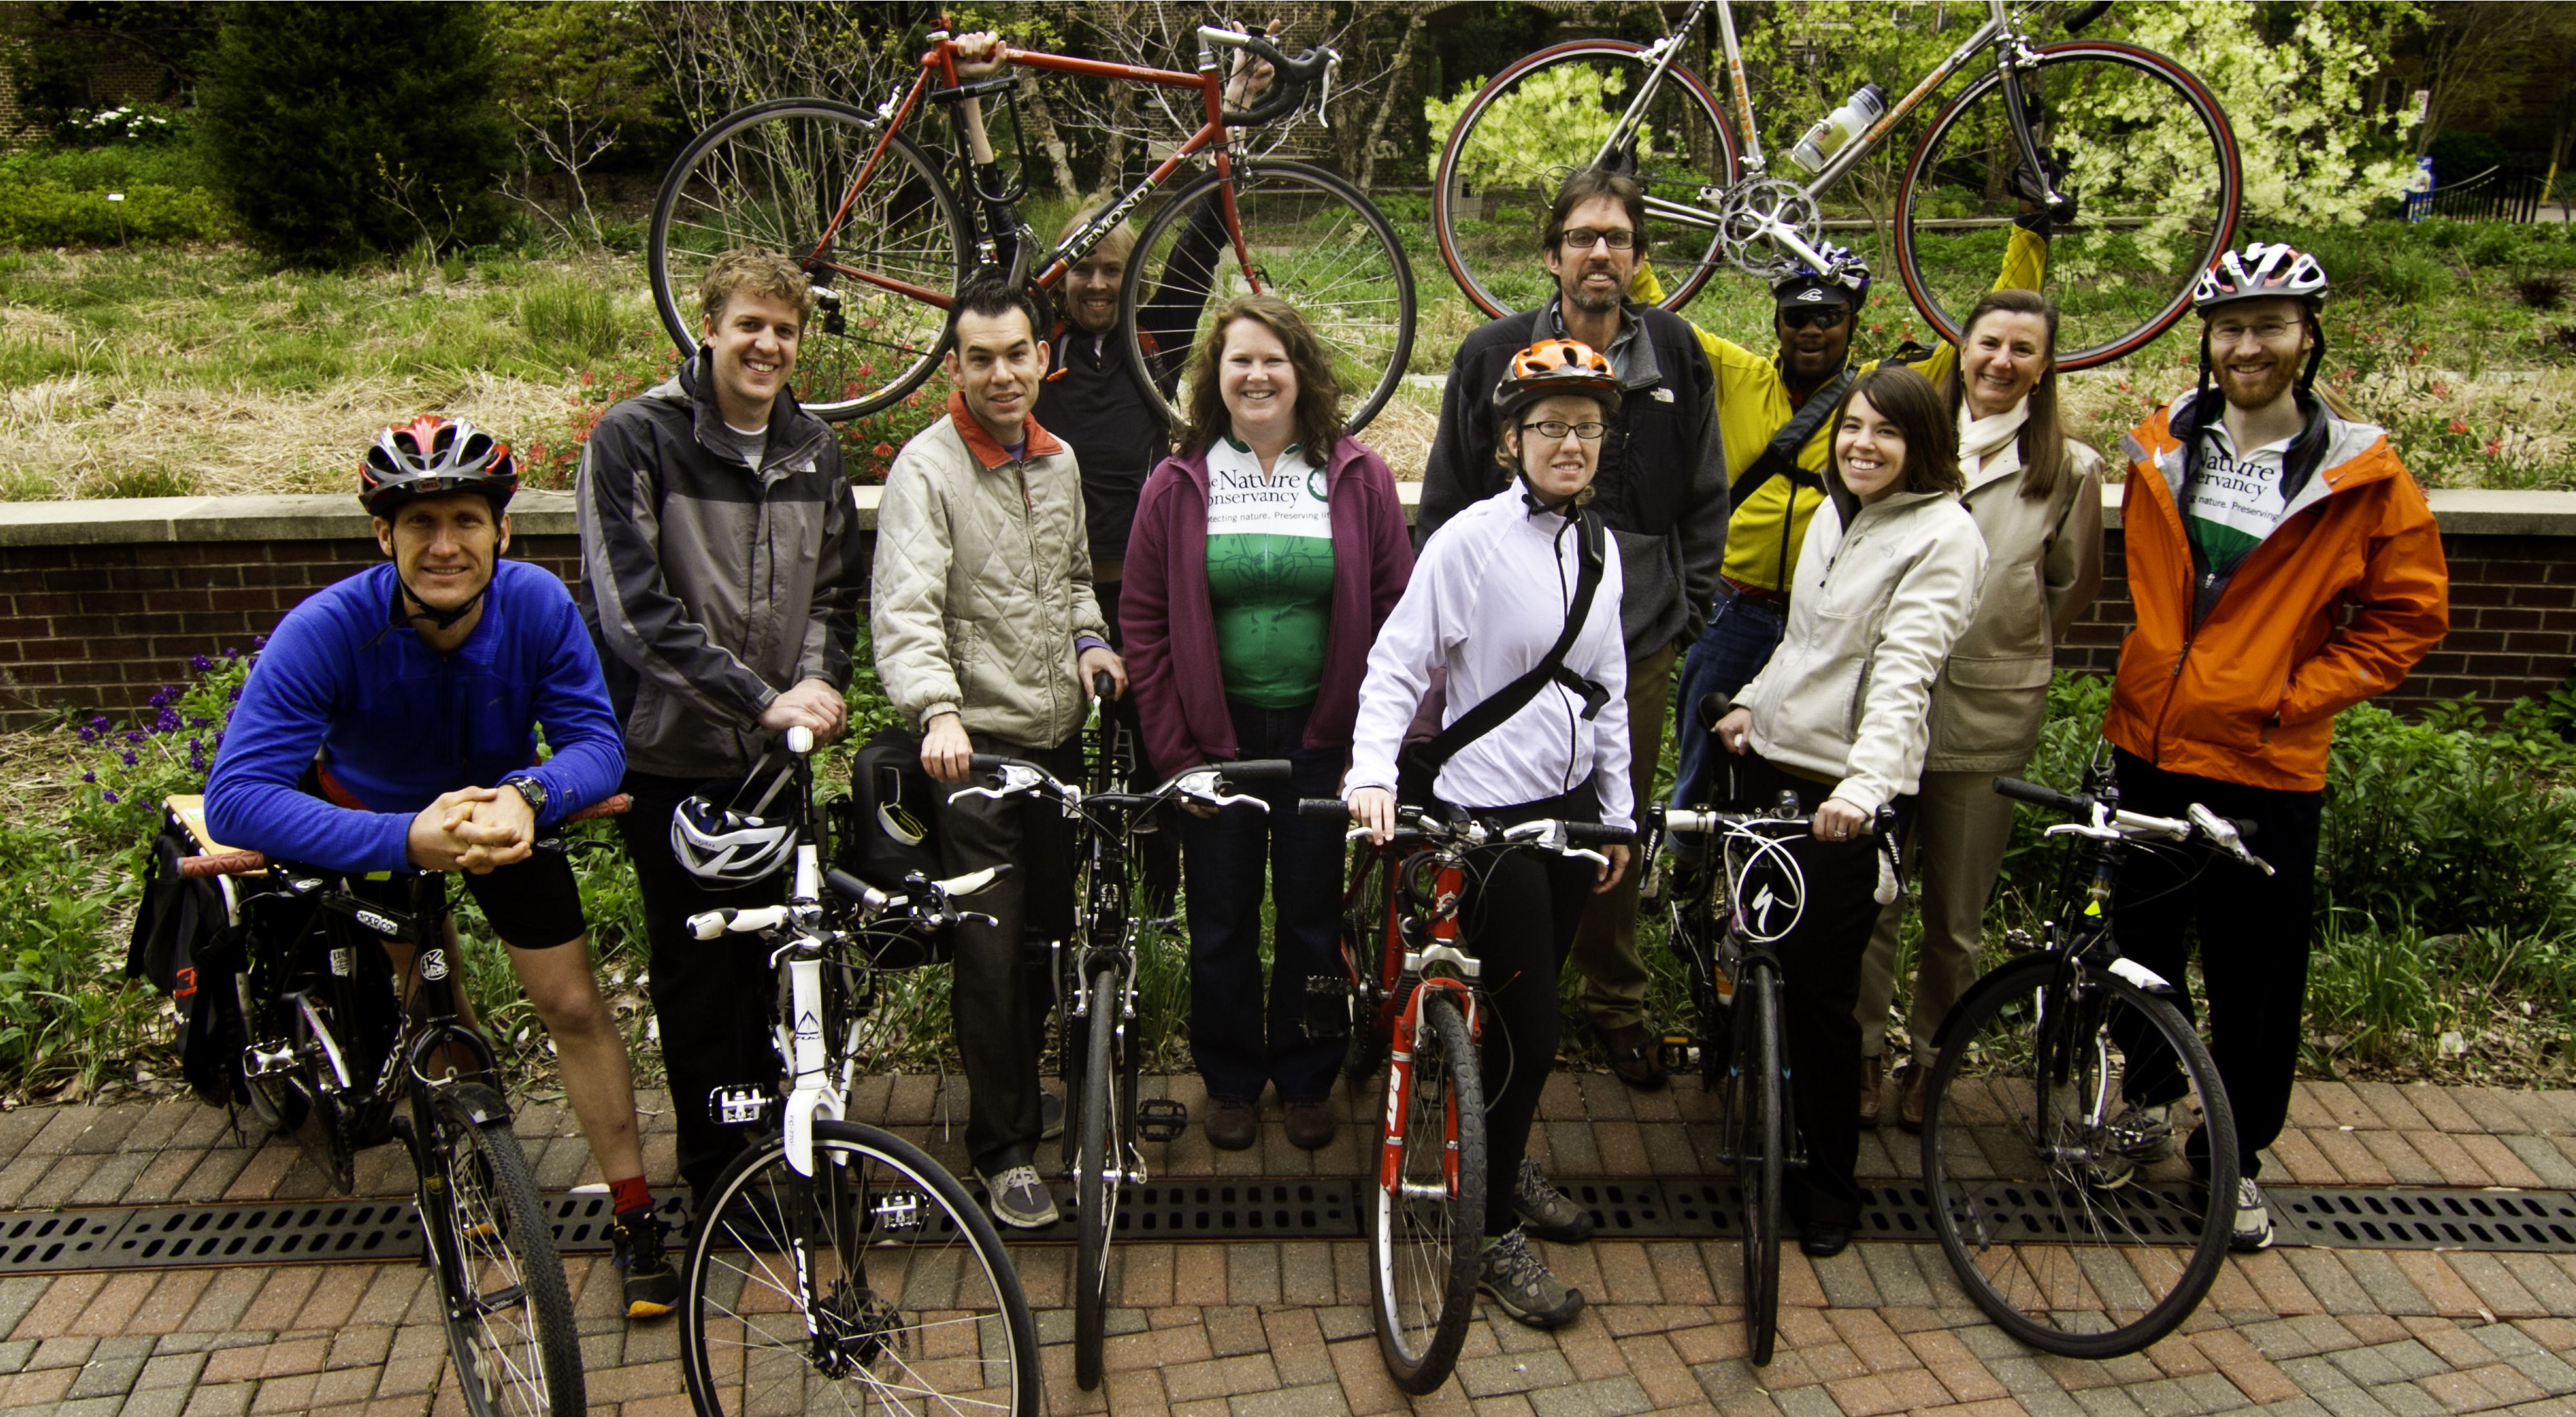 Ten Nature Conservancy employees show off the bikes they use for commuting to work.